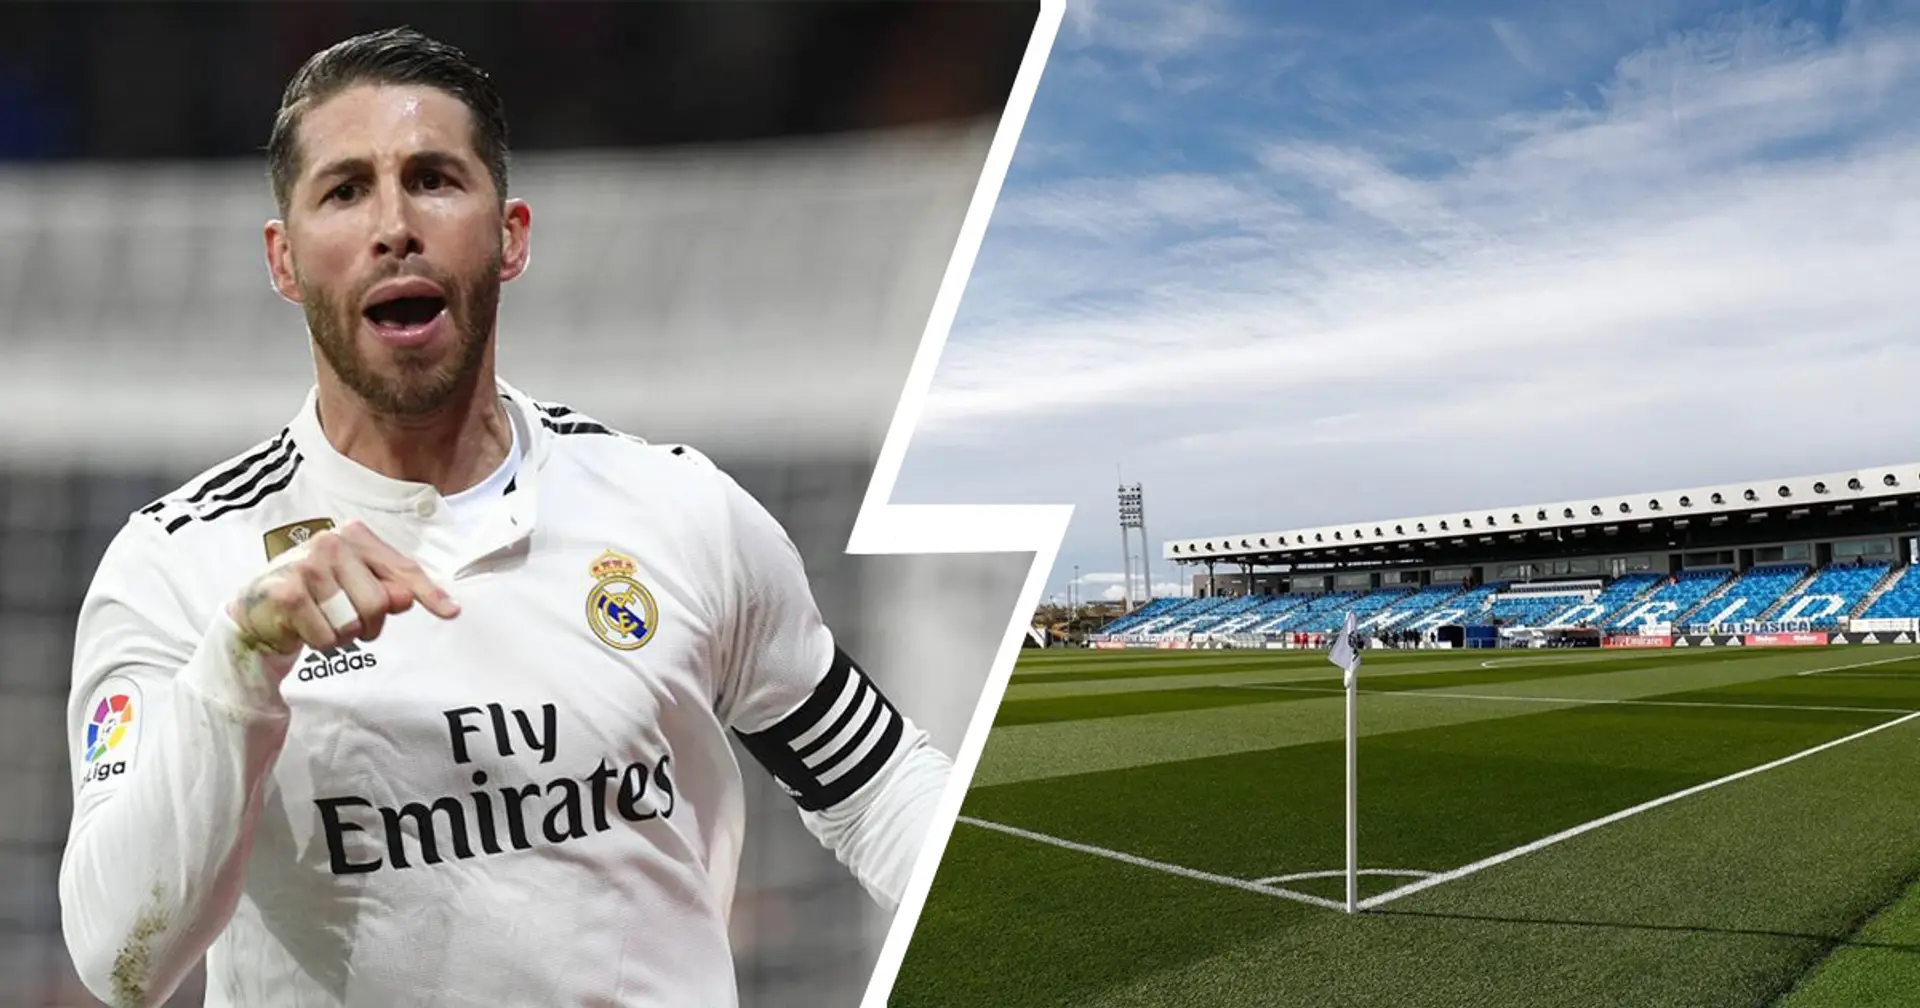 Did you know Sergio Ramos once scored at our old/new stadium?